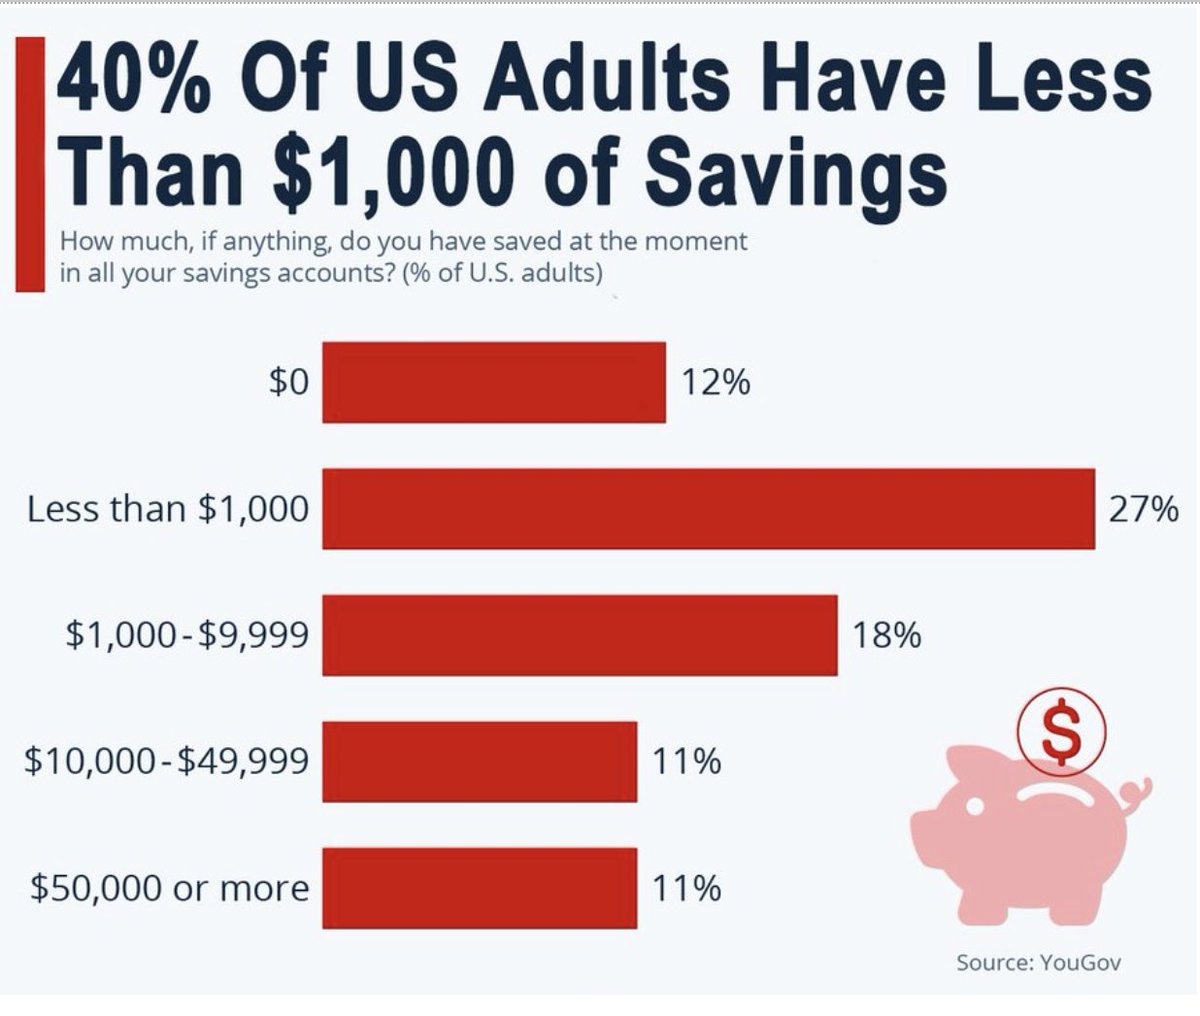 💰💼 Consumer finances are in the spotlight. A recent report shows nearly 40% of US adults have less than $1,000 in savings. This could ripple through the economy and consumer spending. Could we see a pullback in travel and discretionary spending? #ConsumerFinance